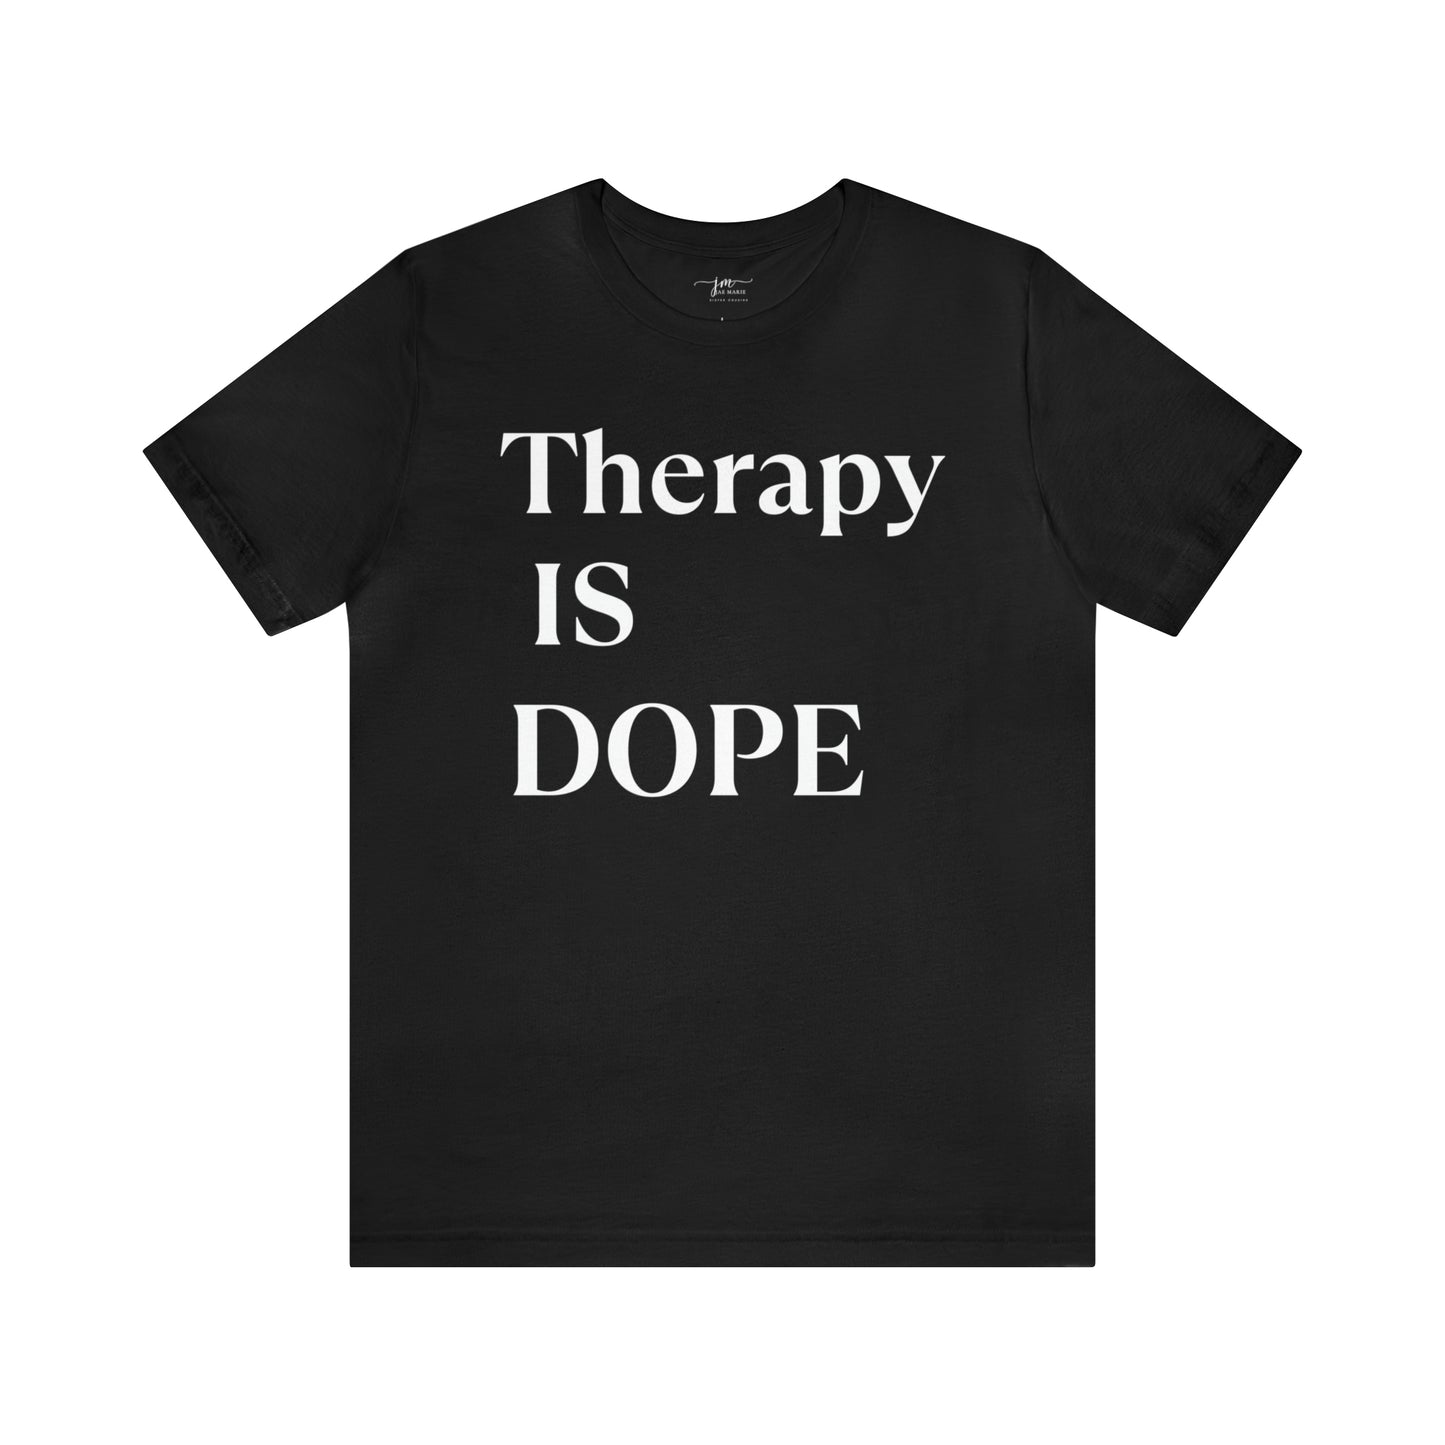 Therapy is Dope - Unisex Short Sleeve Tee